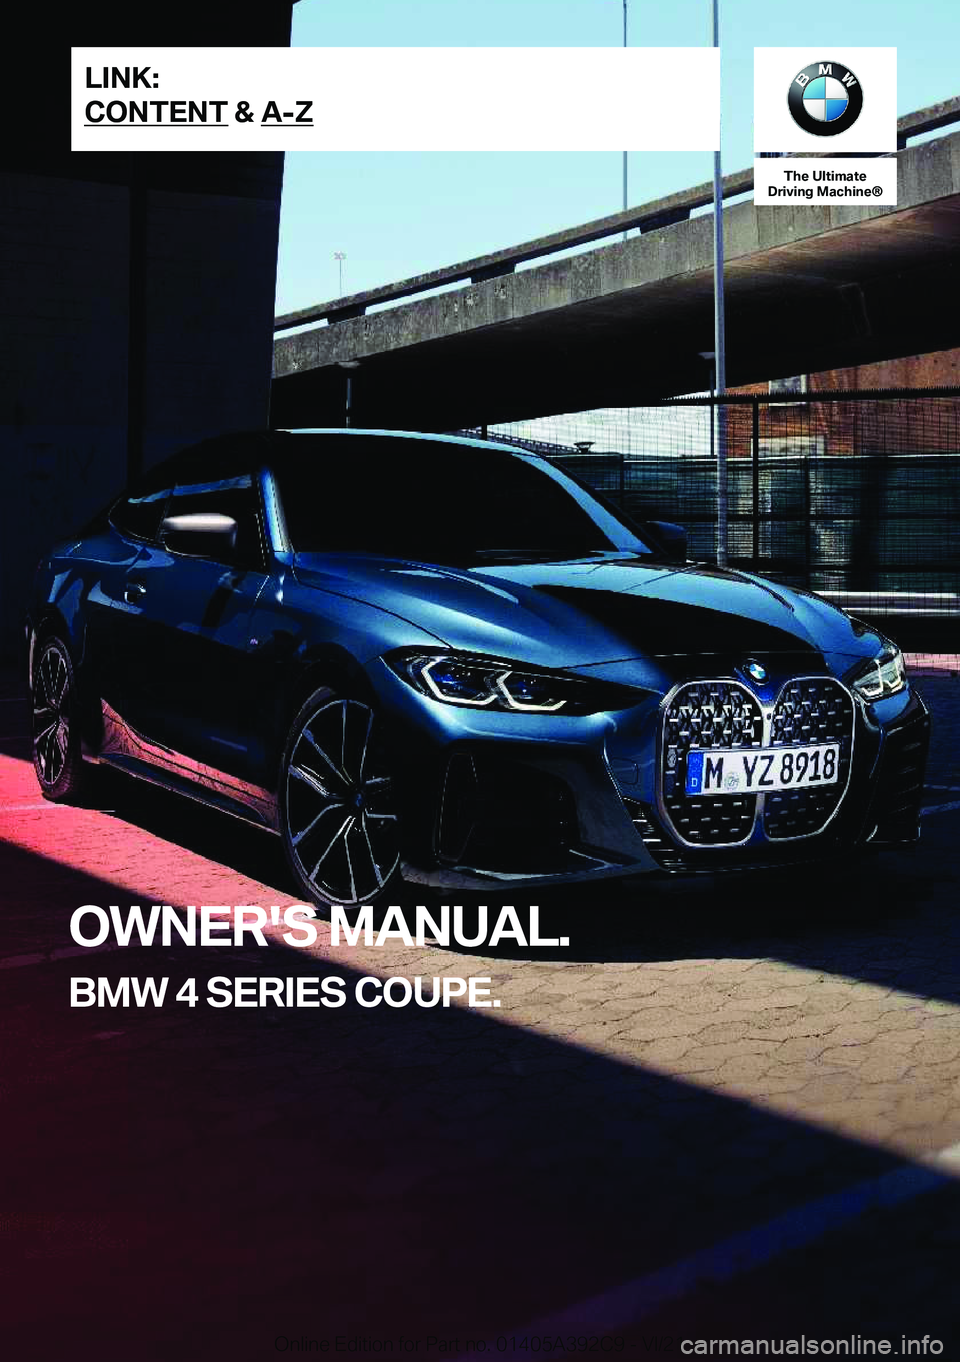 BMW 4 SERIES COUPE 2022  Owners Manual �T�h�e��U�l�t�i�m�a�t�e
�D�r�i�v�i�n�g��M�a�c�h�i�n�e�n
�O�W�N�E�R�'�S��M�A�N�U�A�L�.
�B�M�W��4��S�E�R�I�E�S��C�O�U�P�E�.�L�I�N�K�:
�C�O�N�T�E�N�T��&��A�-�Z�O�n�l�i�n�e��E�d�i�t�i�o�n��f